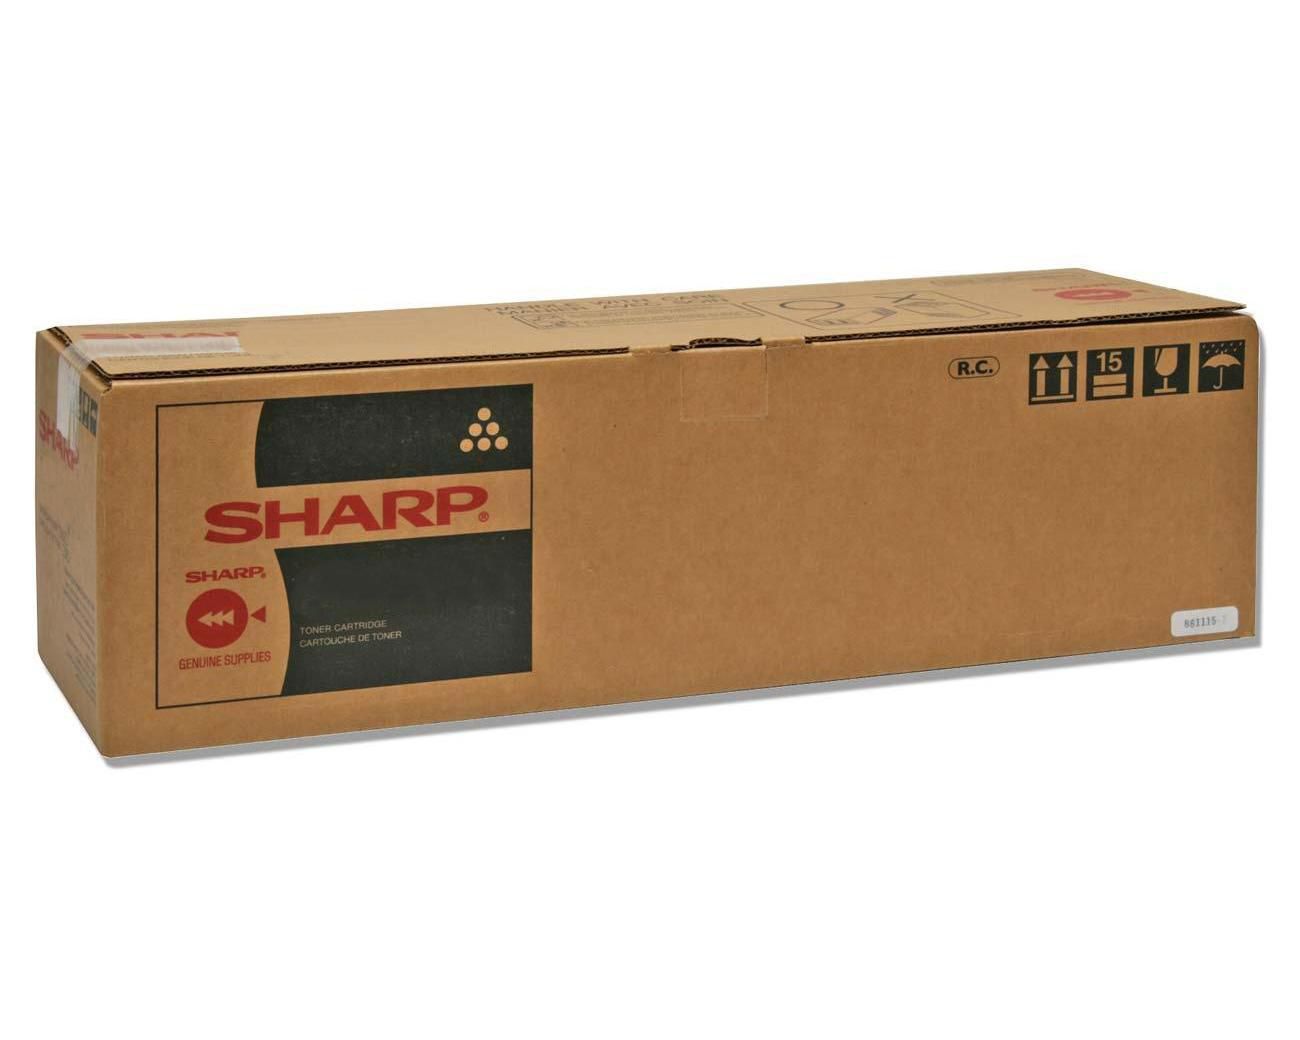 Sharp MX-510MK Charger Kit Pages 100.000 